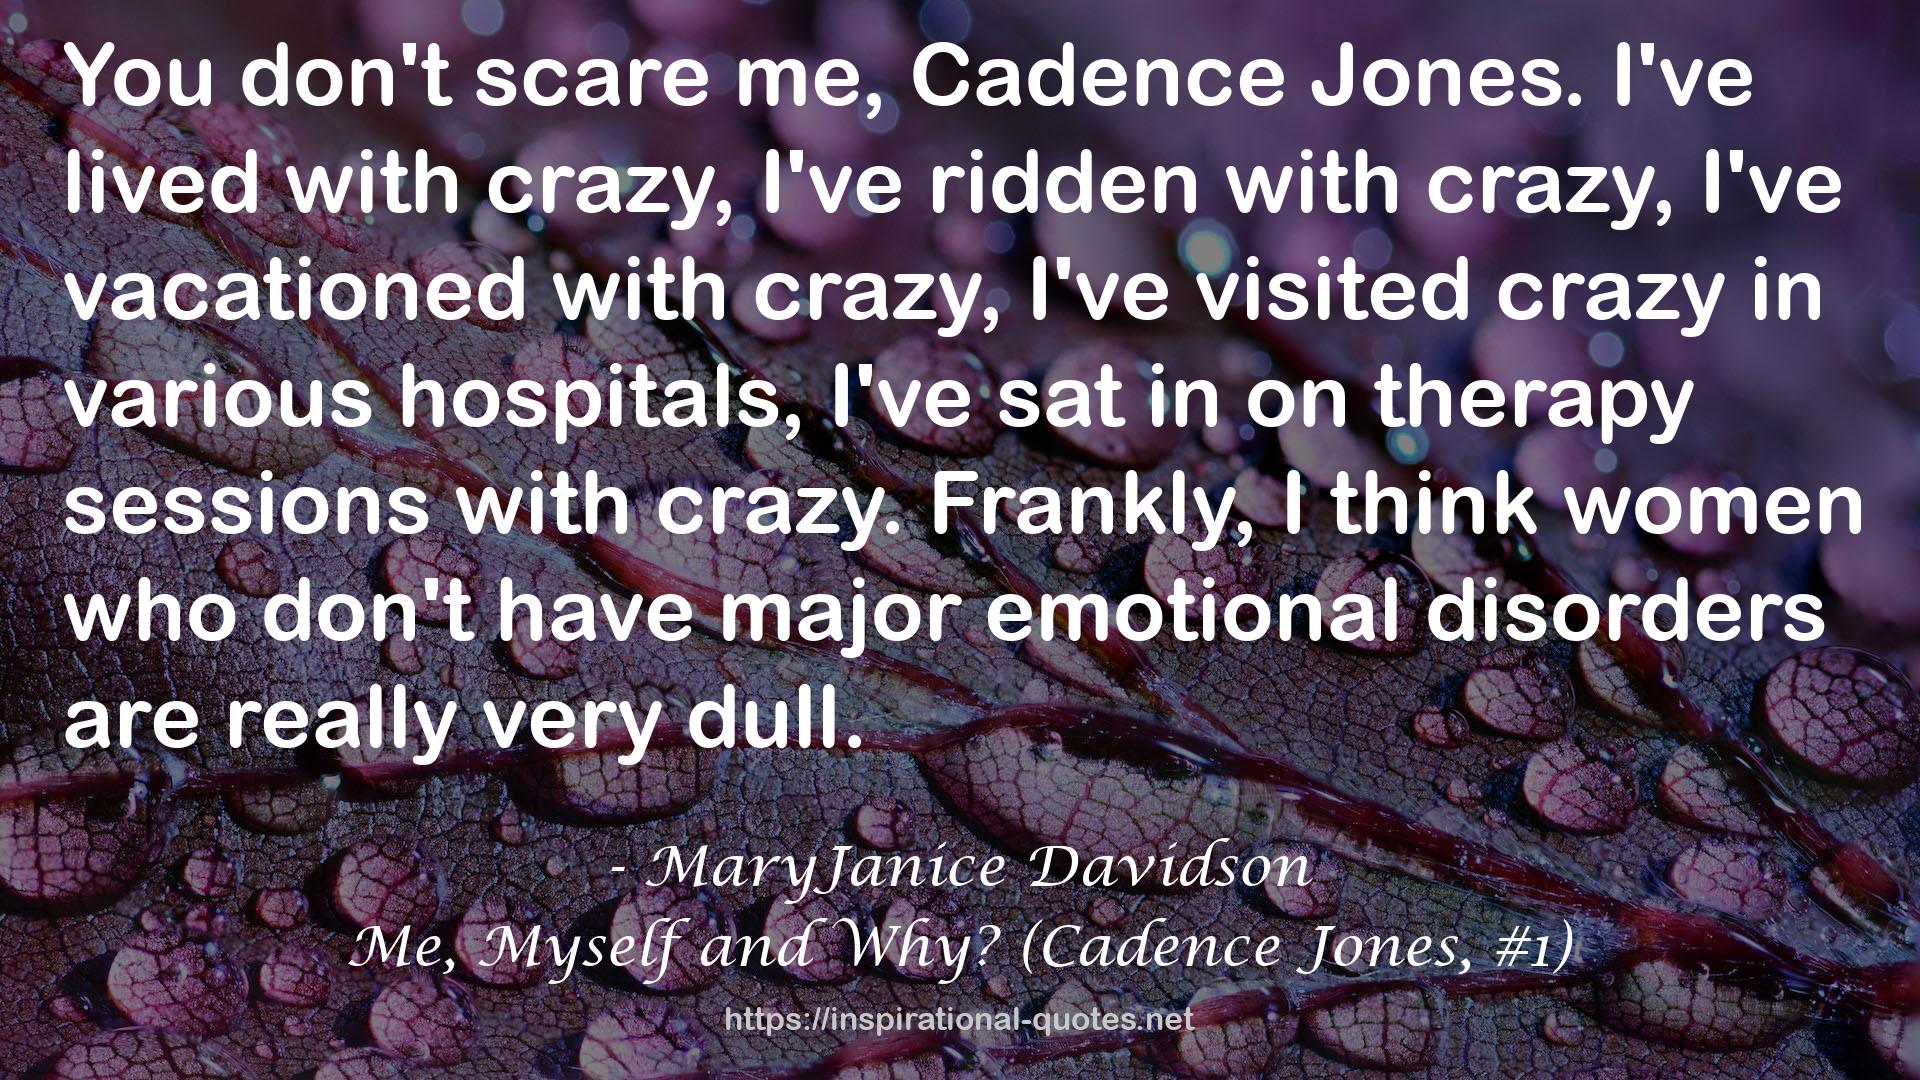 Me, Myself and Why? (Cadence Jones, #1) QUOTES